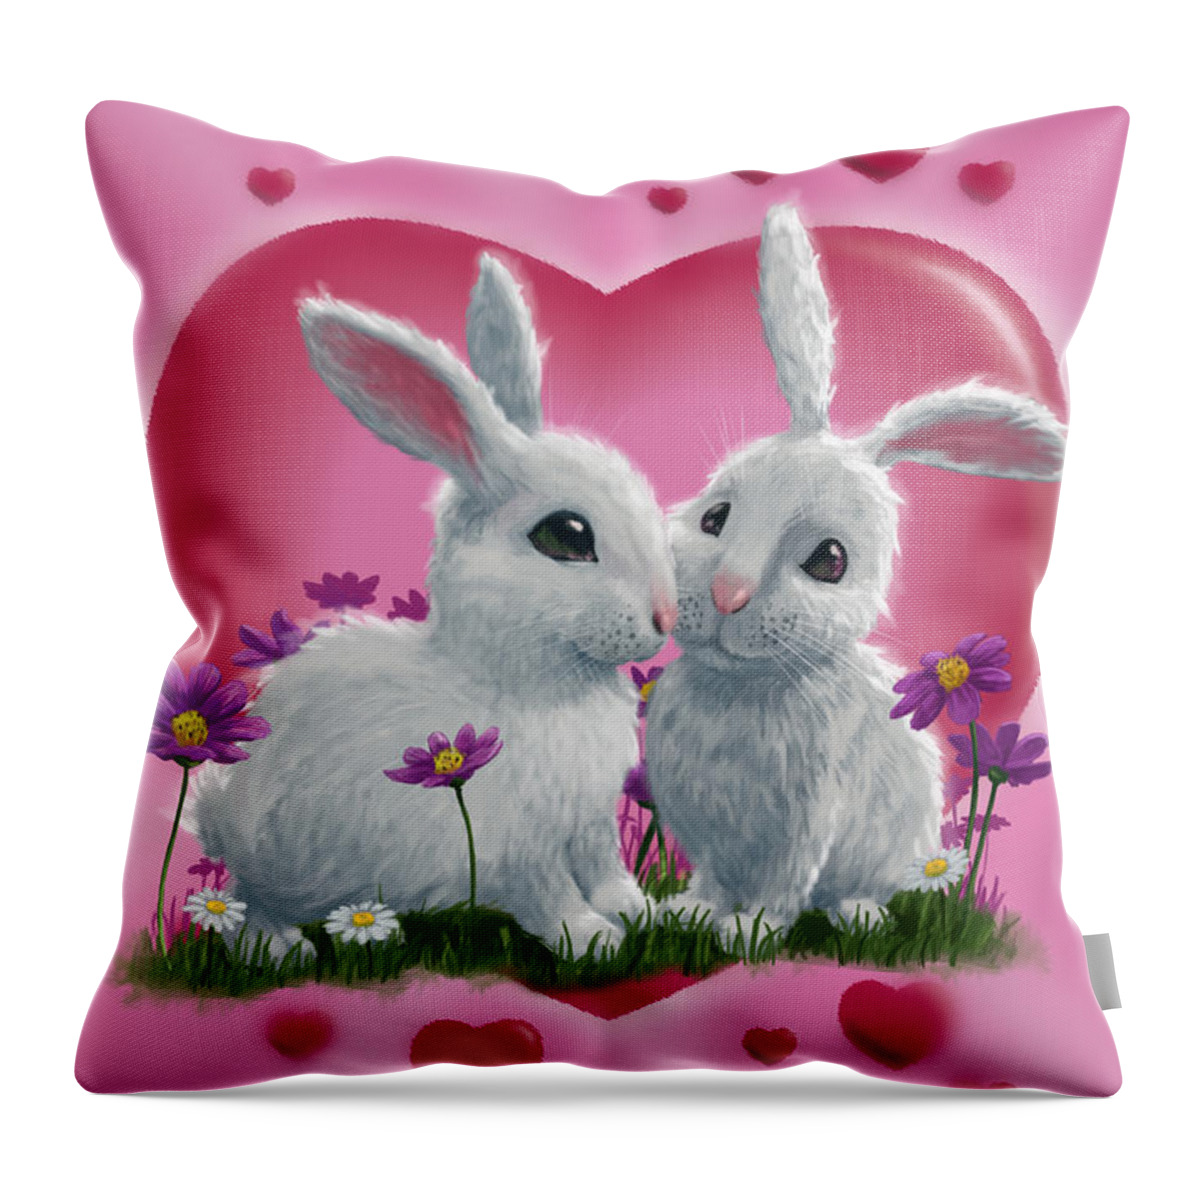 Rabbit Throw Pillow featuring the digital art Romantic White Rabbits with Heart by Martin Davey